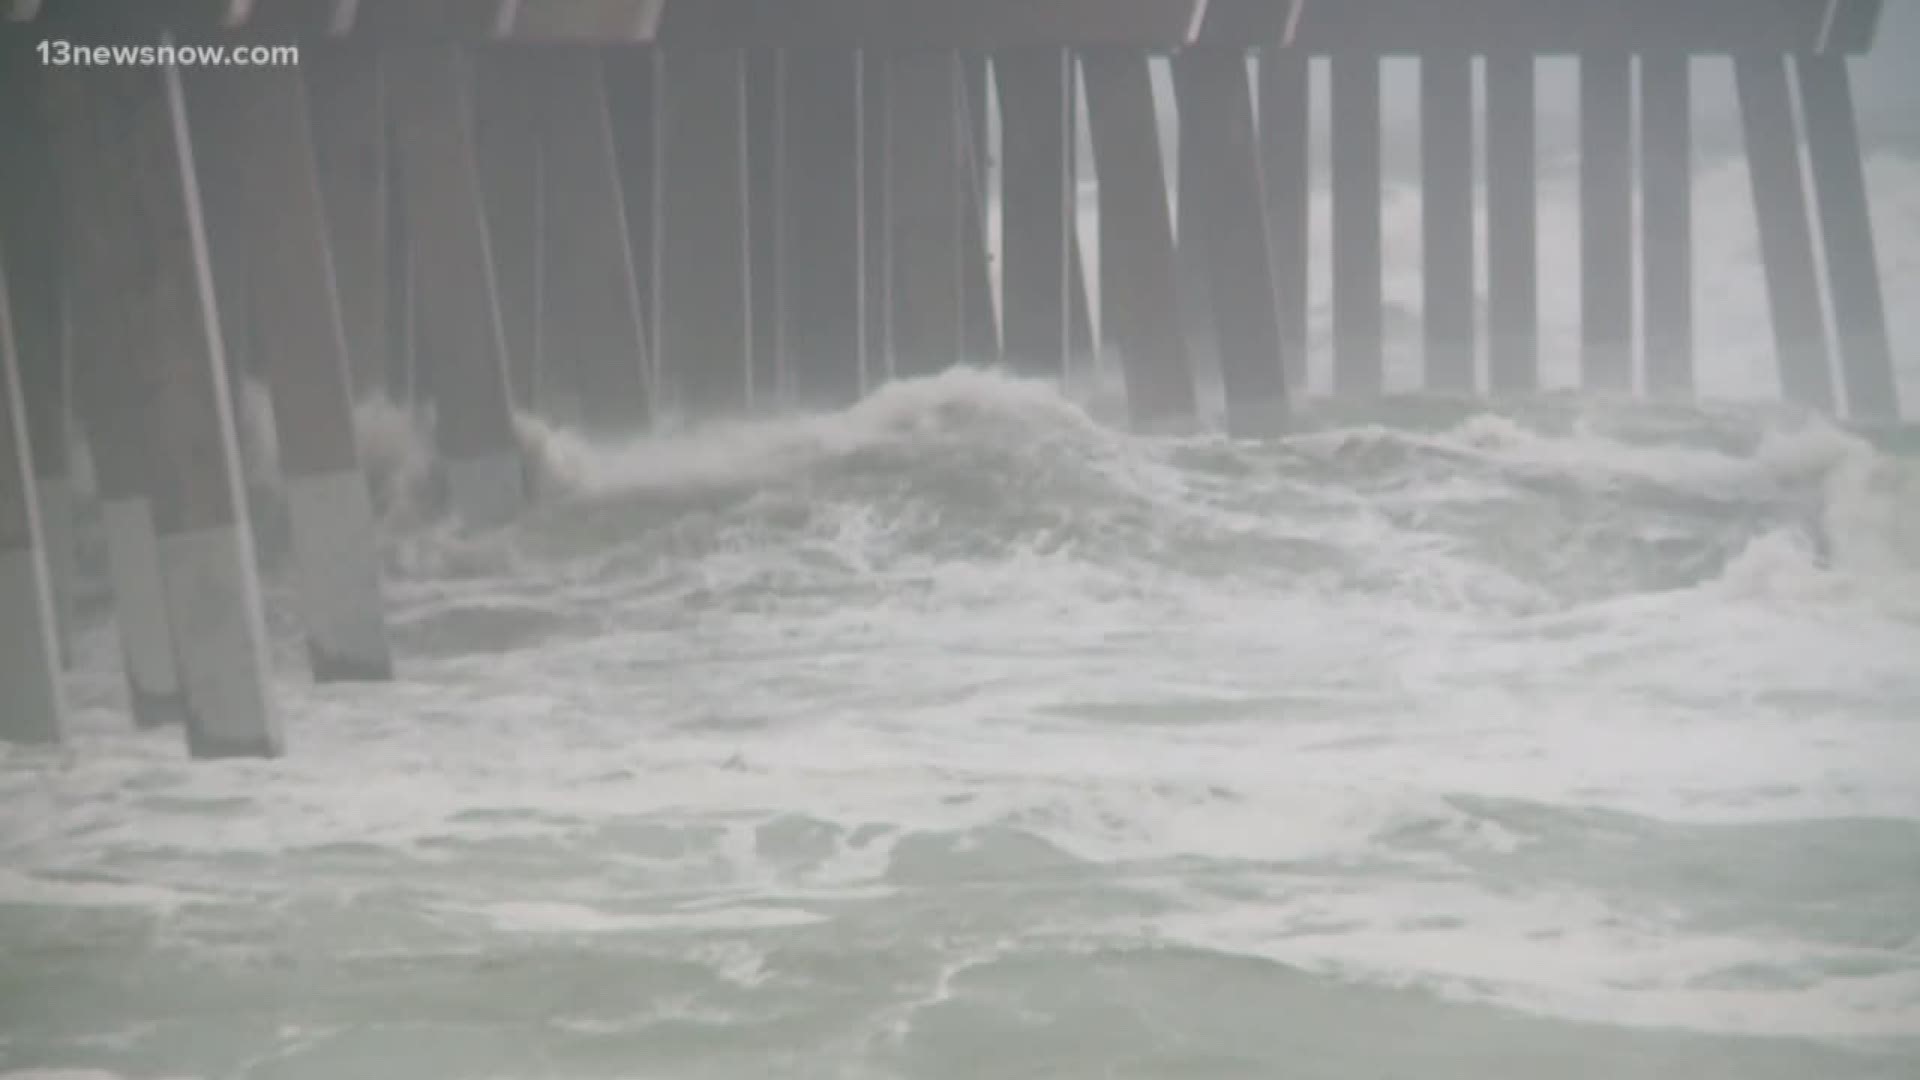 Officials warned drivers to be careful if they traveled in coastal North Carolina, especially on NC-12.